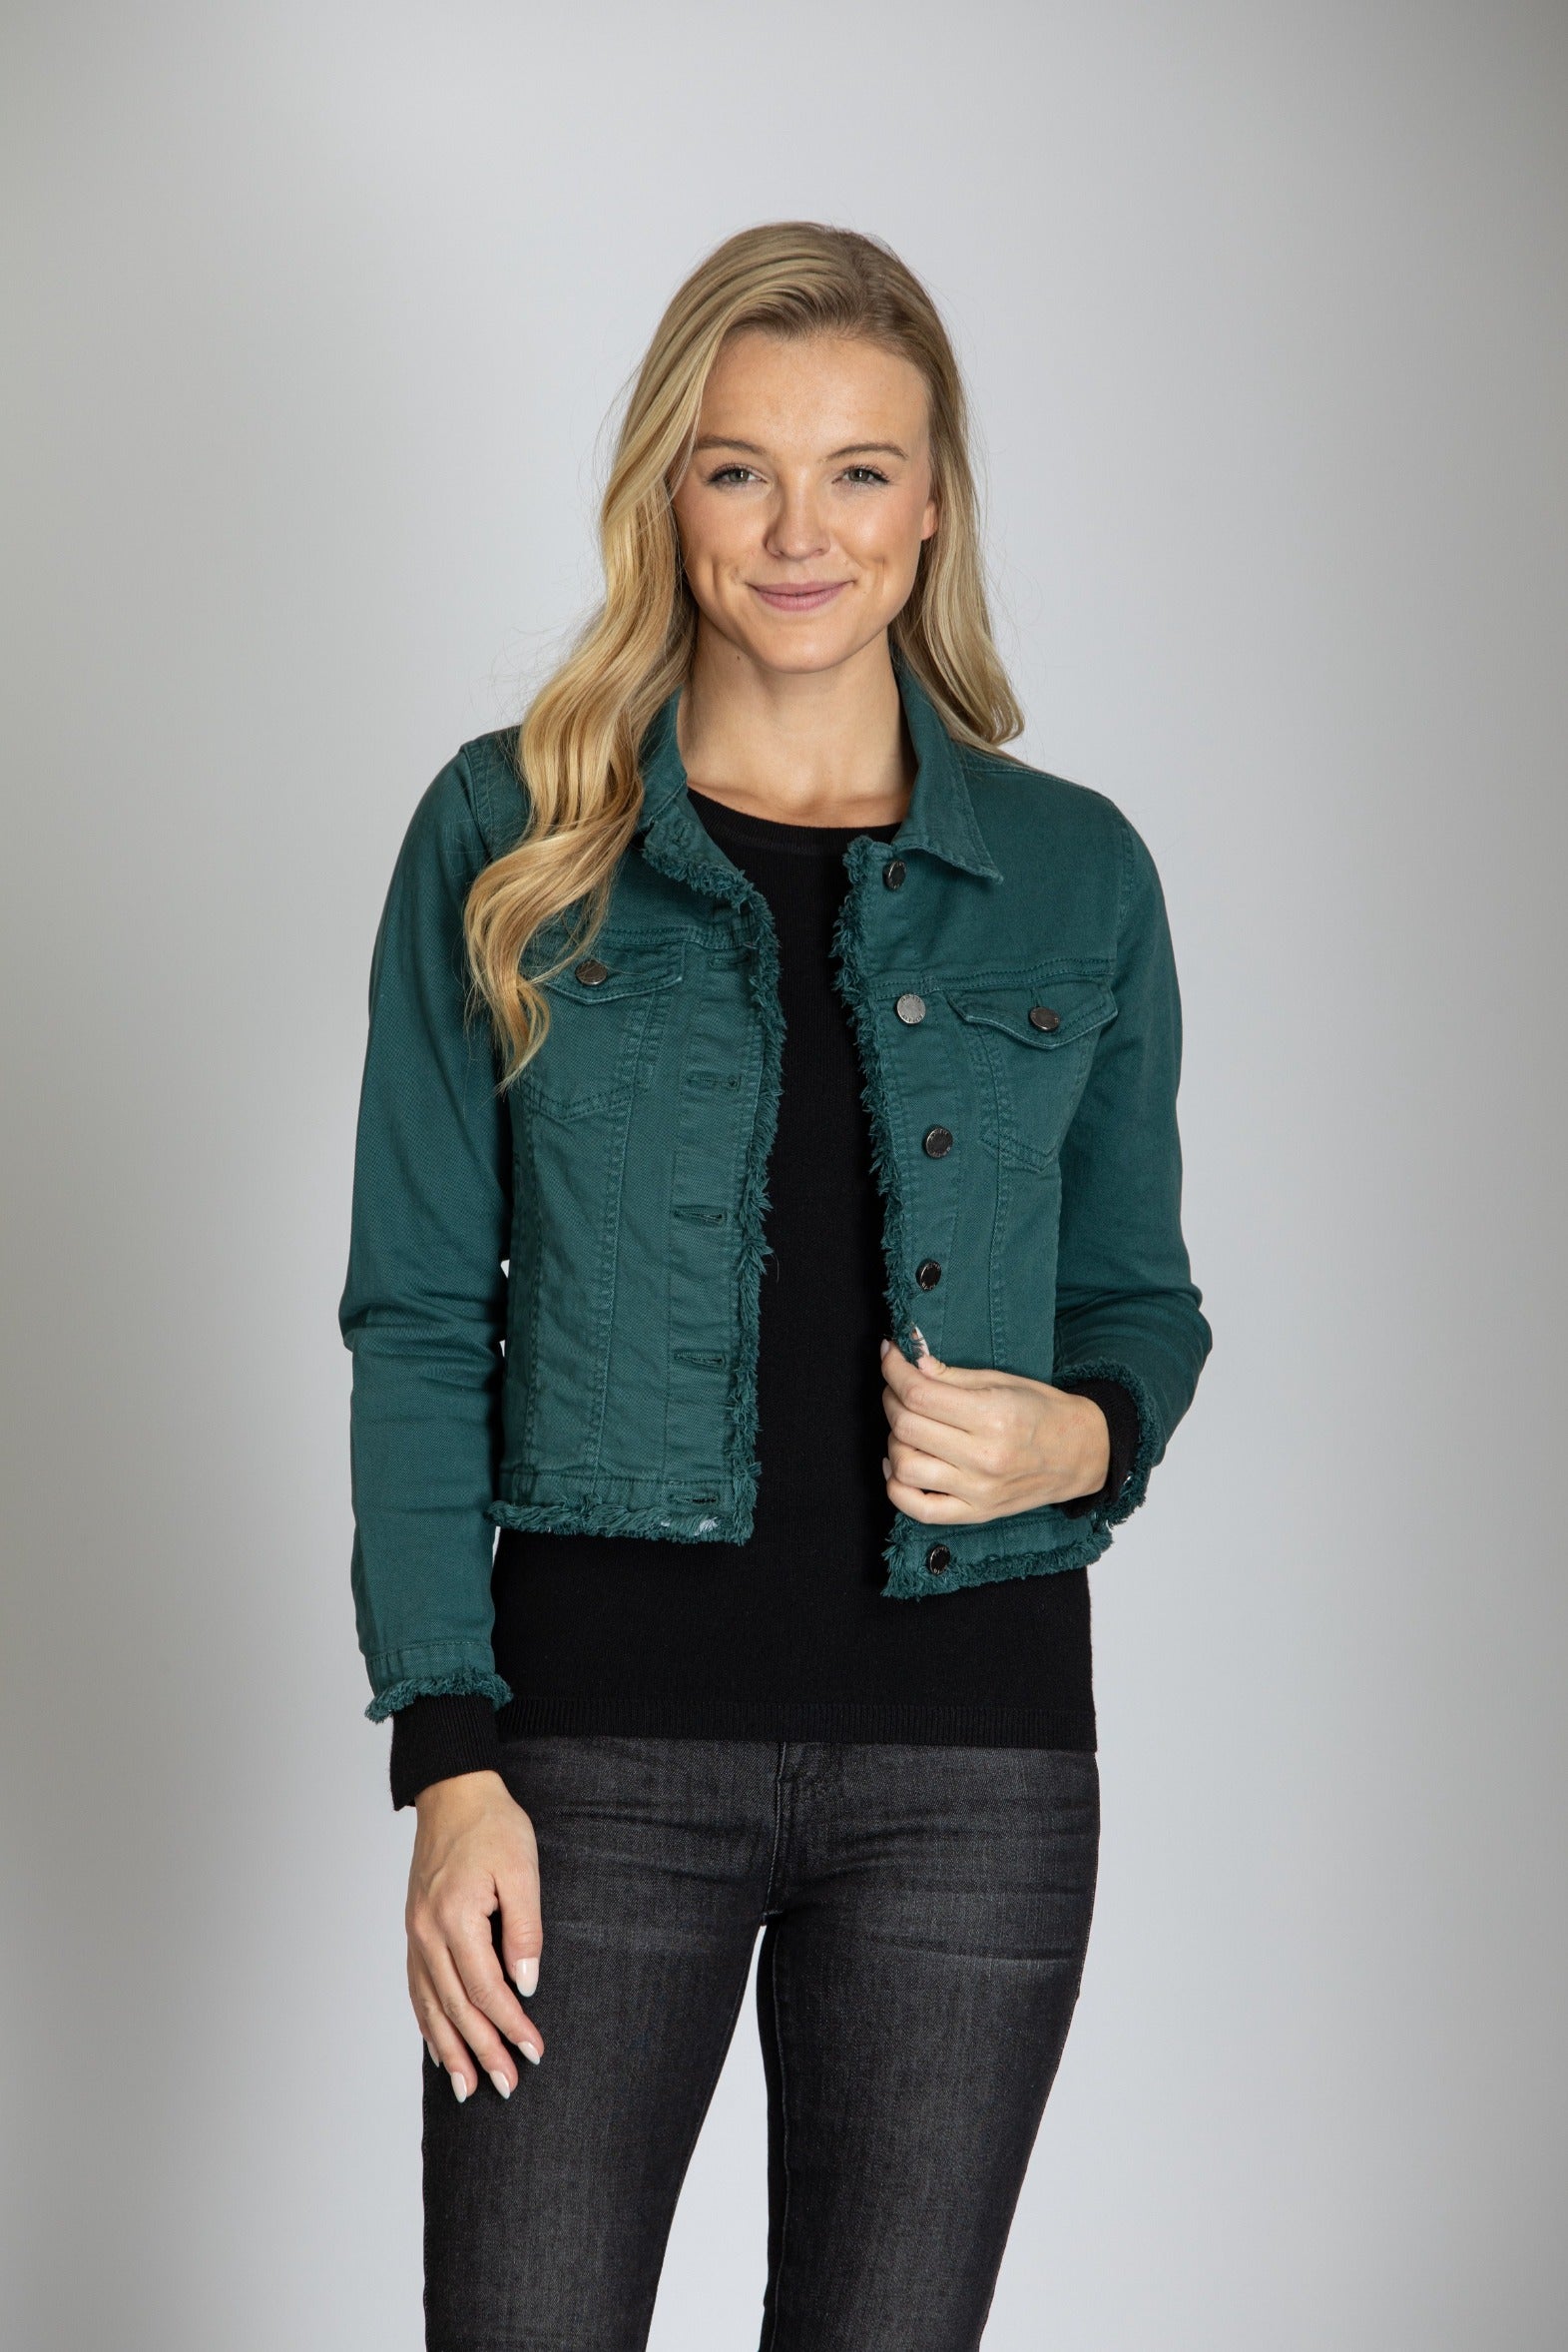 Jean Jacket With Frayed Detail Sagebrush Green Front-1 APNY